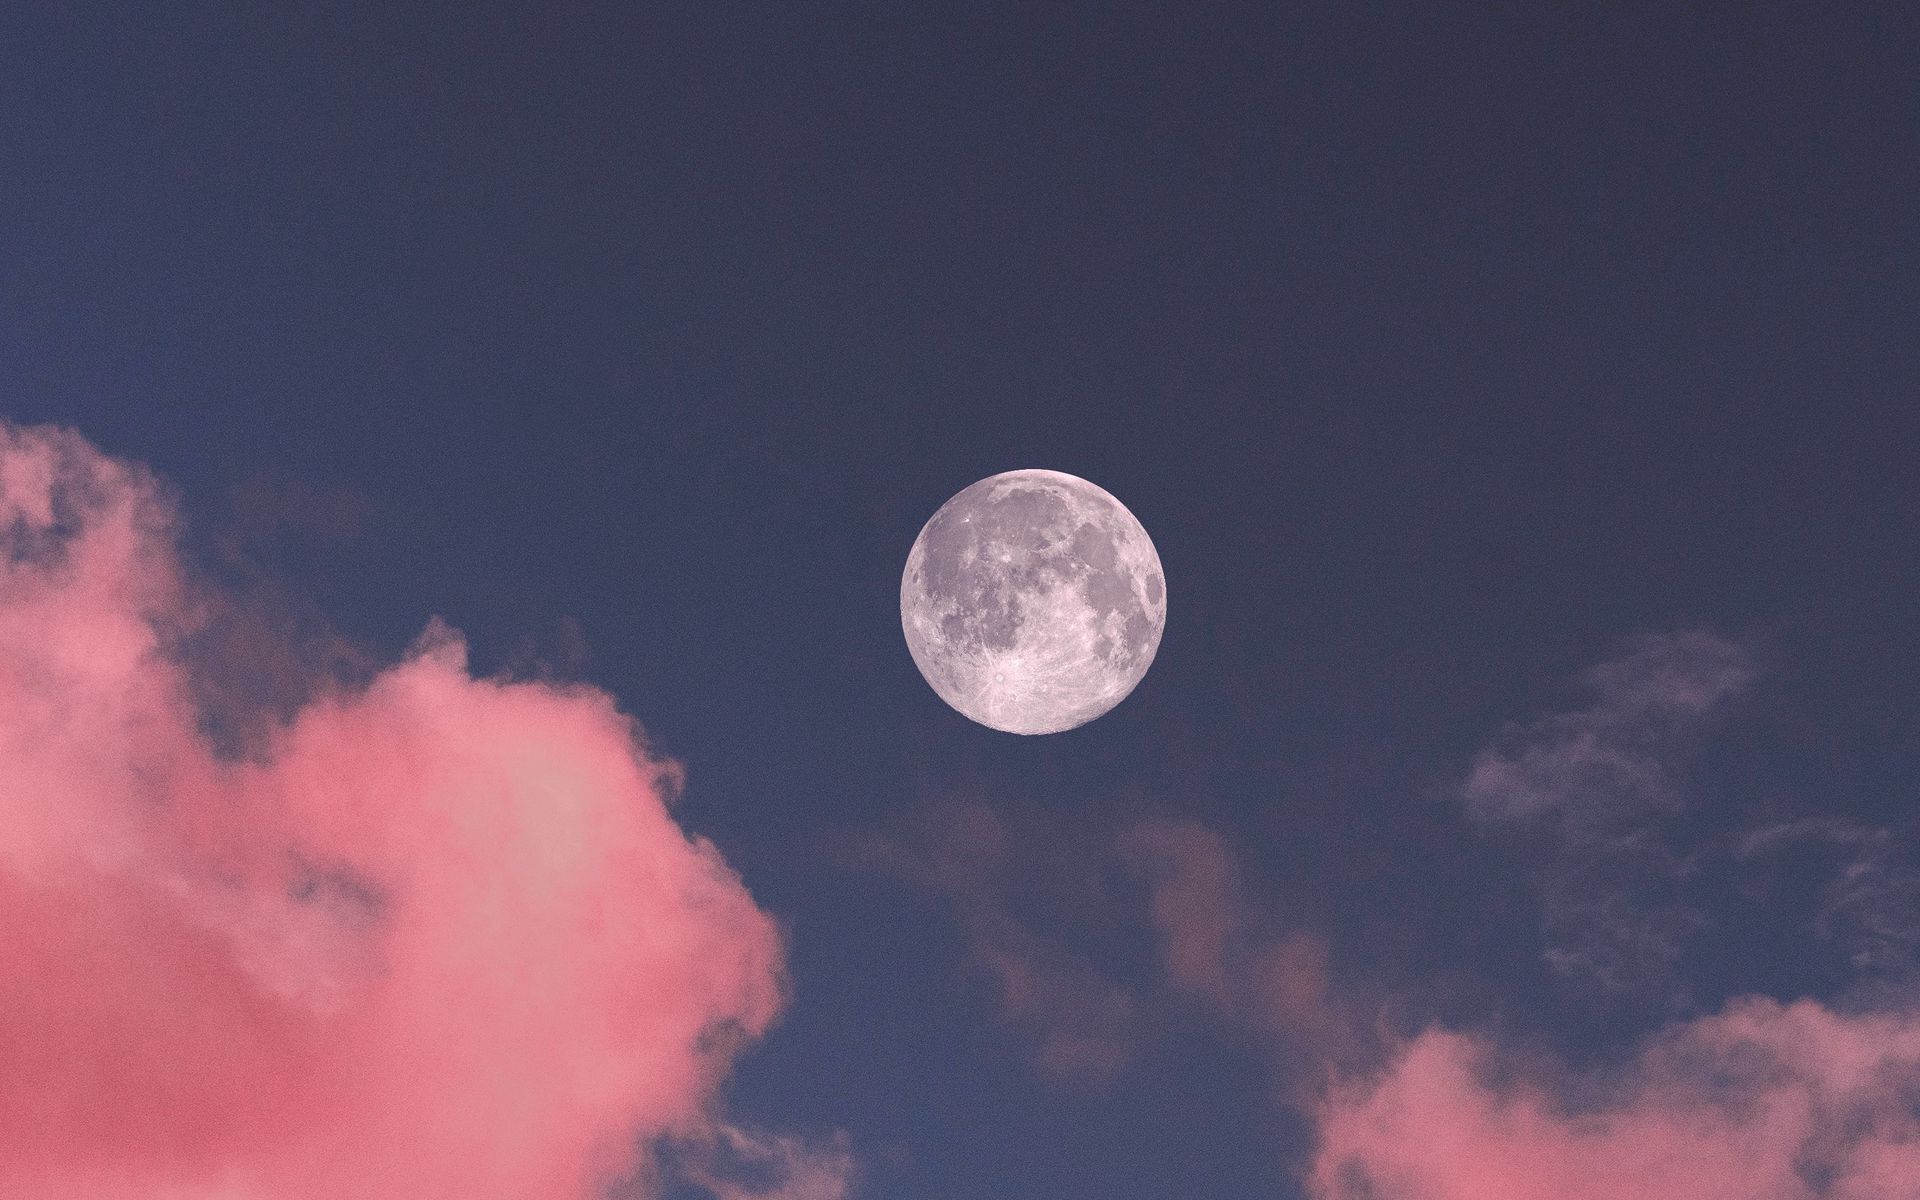 Download wallpaper 1920x1200 moon, clouds, pink, sky, full moon widescreen 16:10 HD background